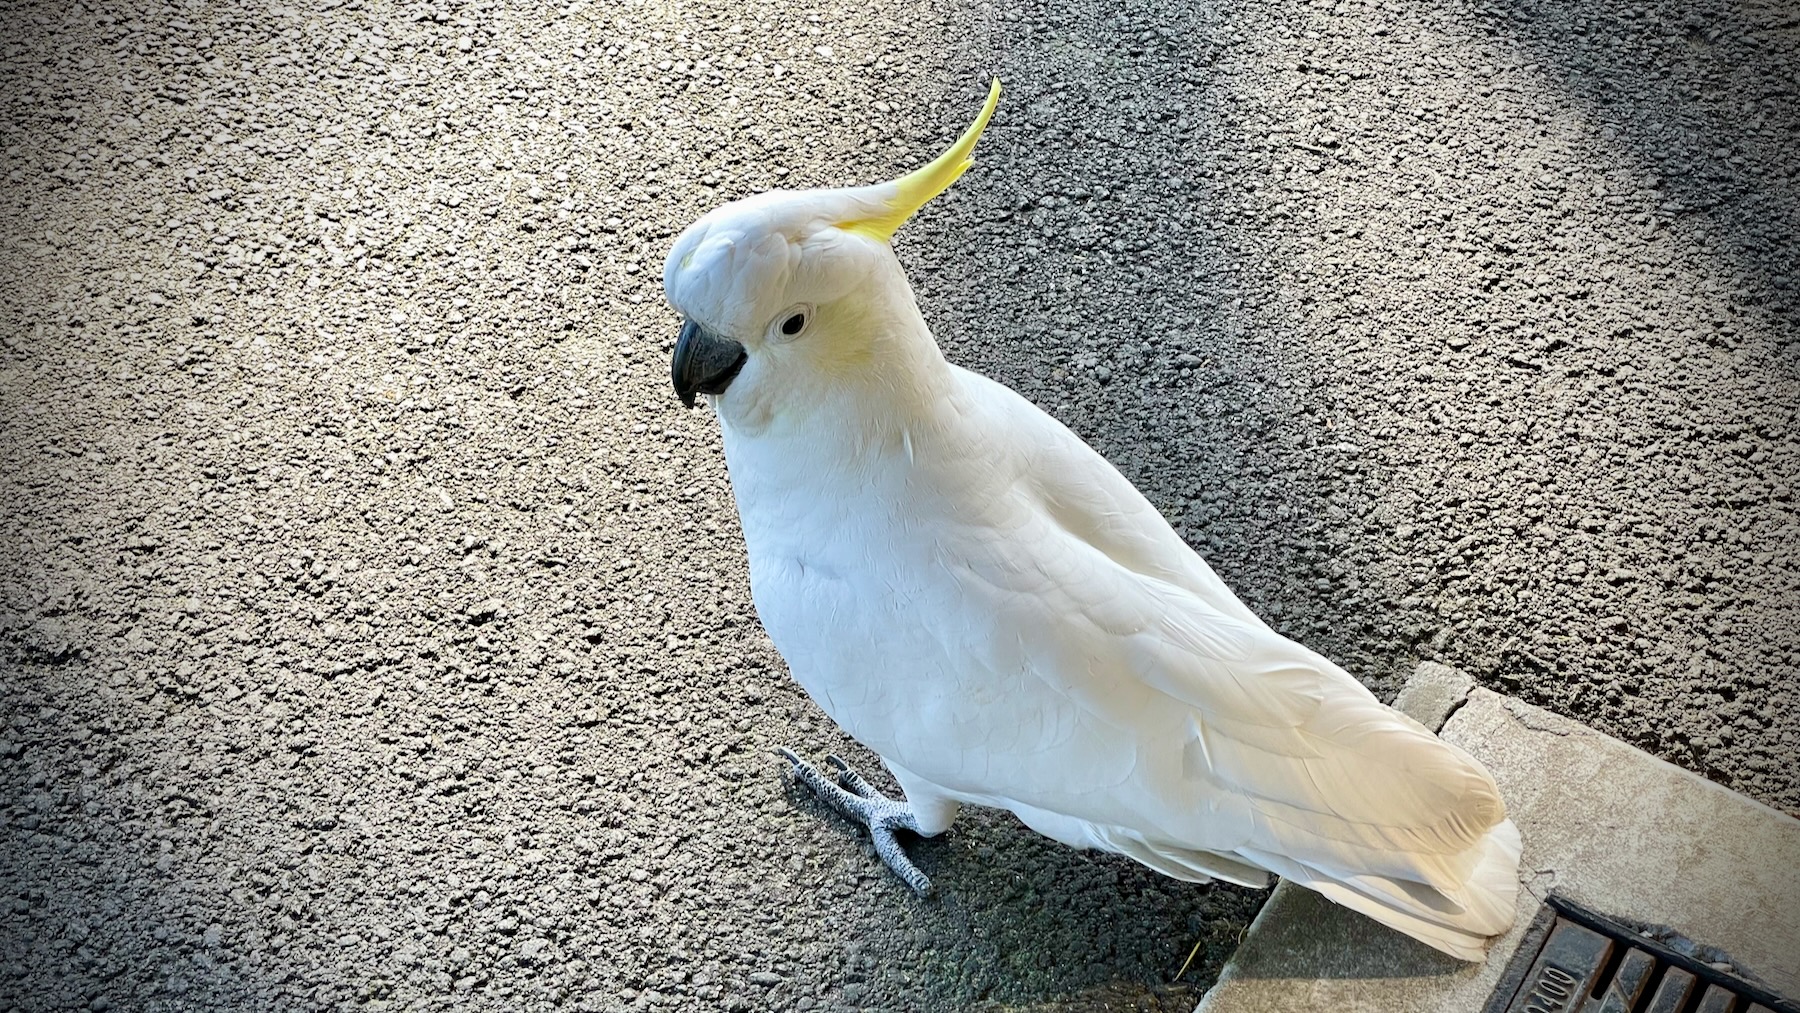 Sulphur-crested cockatoo at Wentworth Falls station